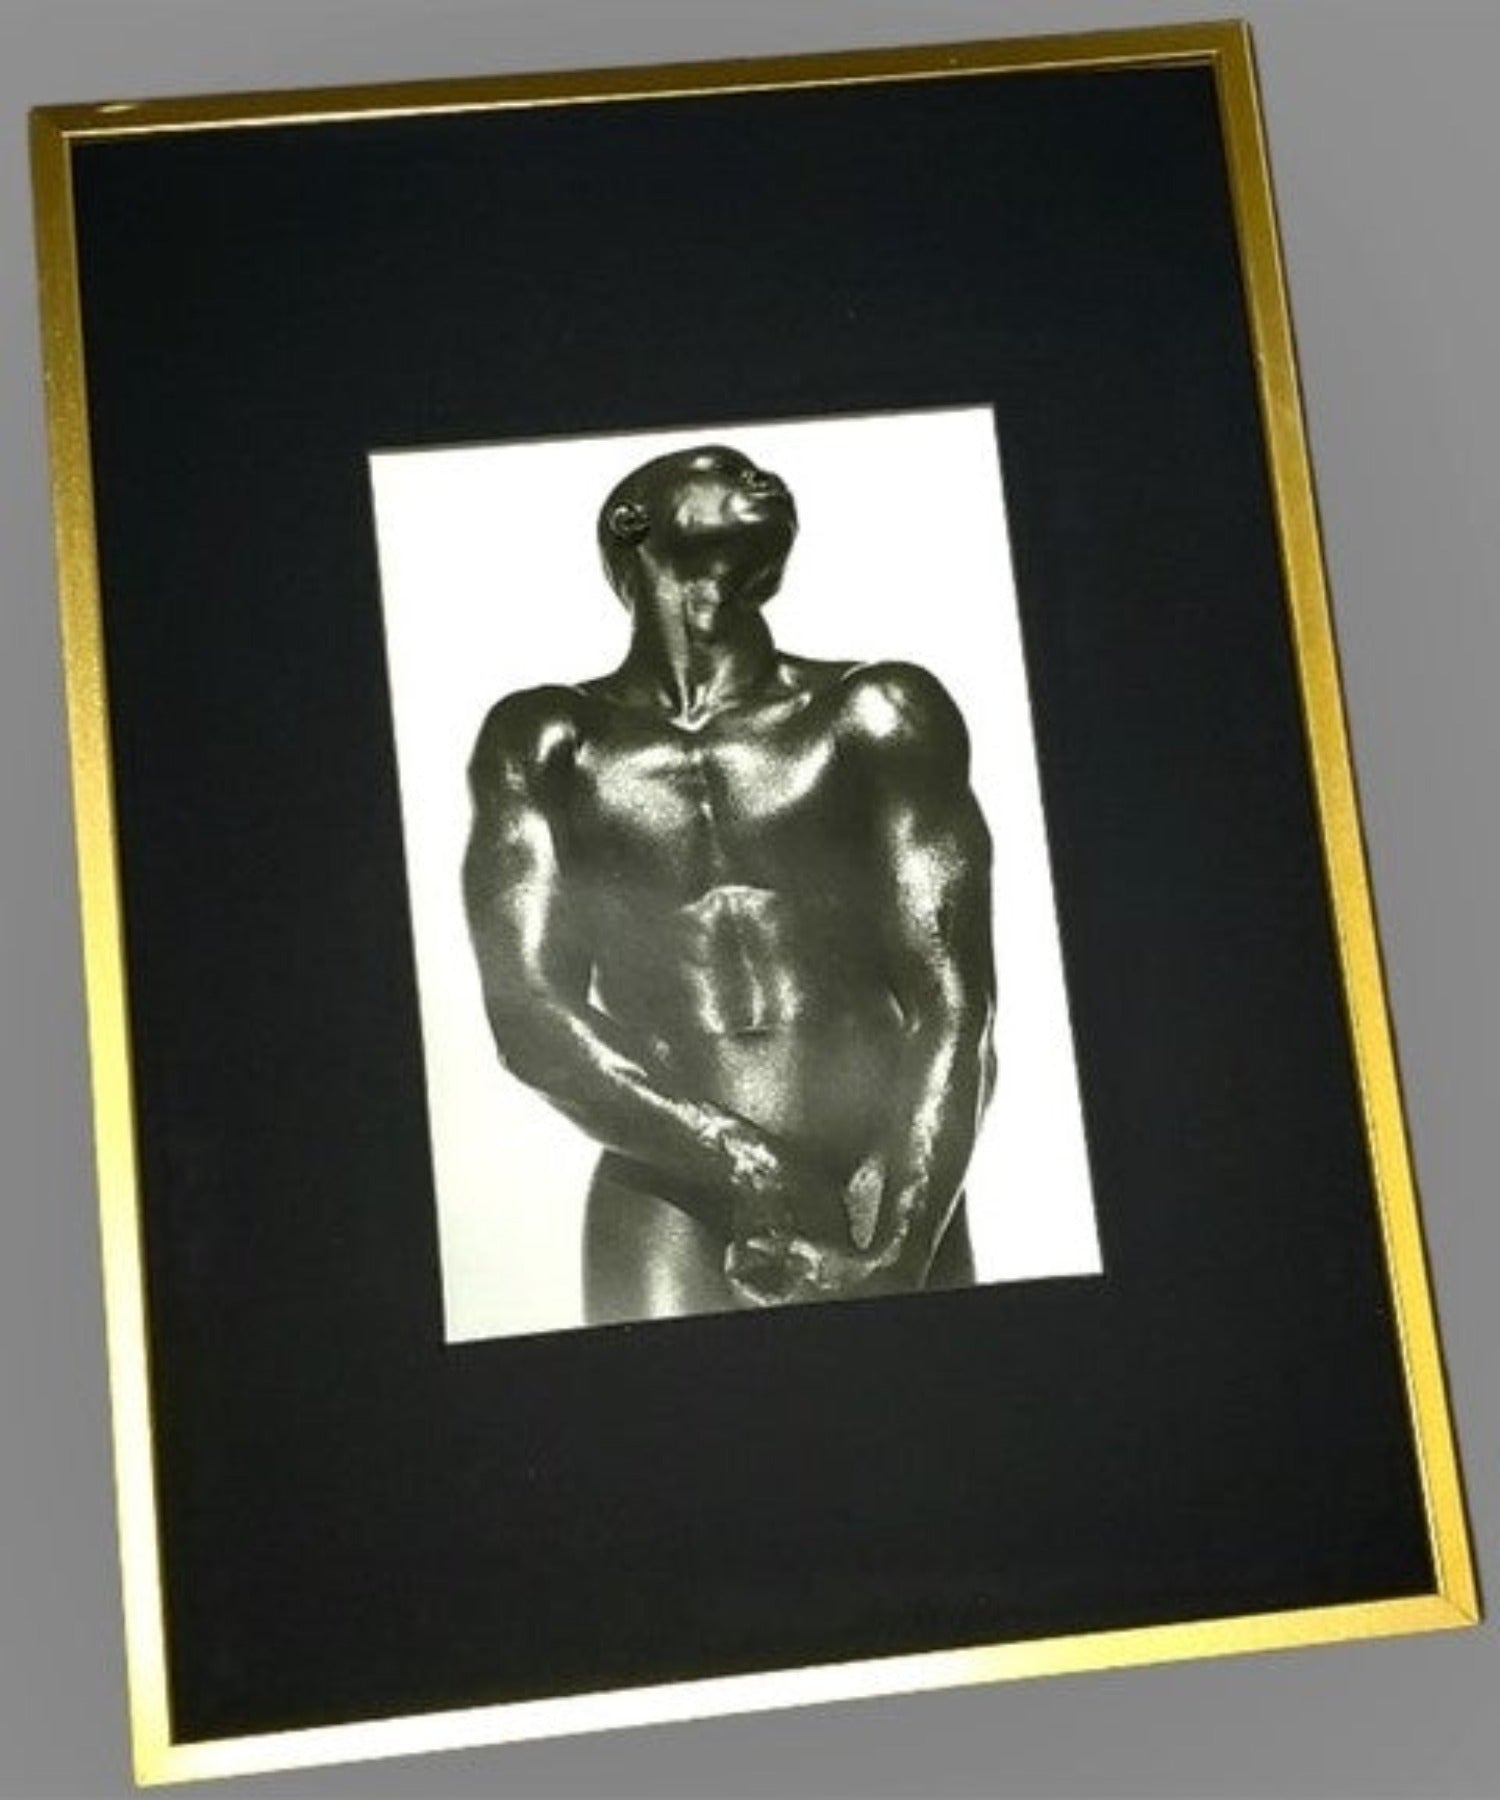 Black Male Herb Ritts Custom Framed In AREA51GALLERY New Orleans